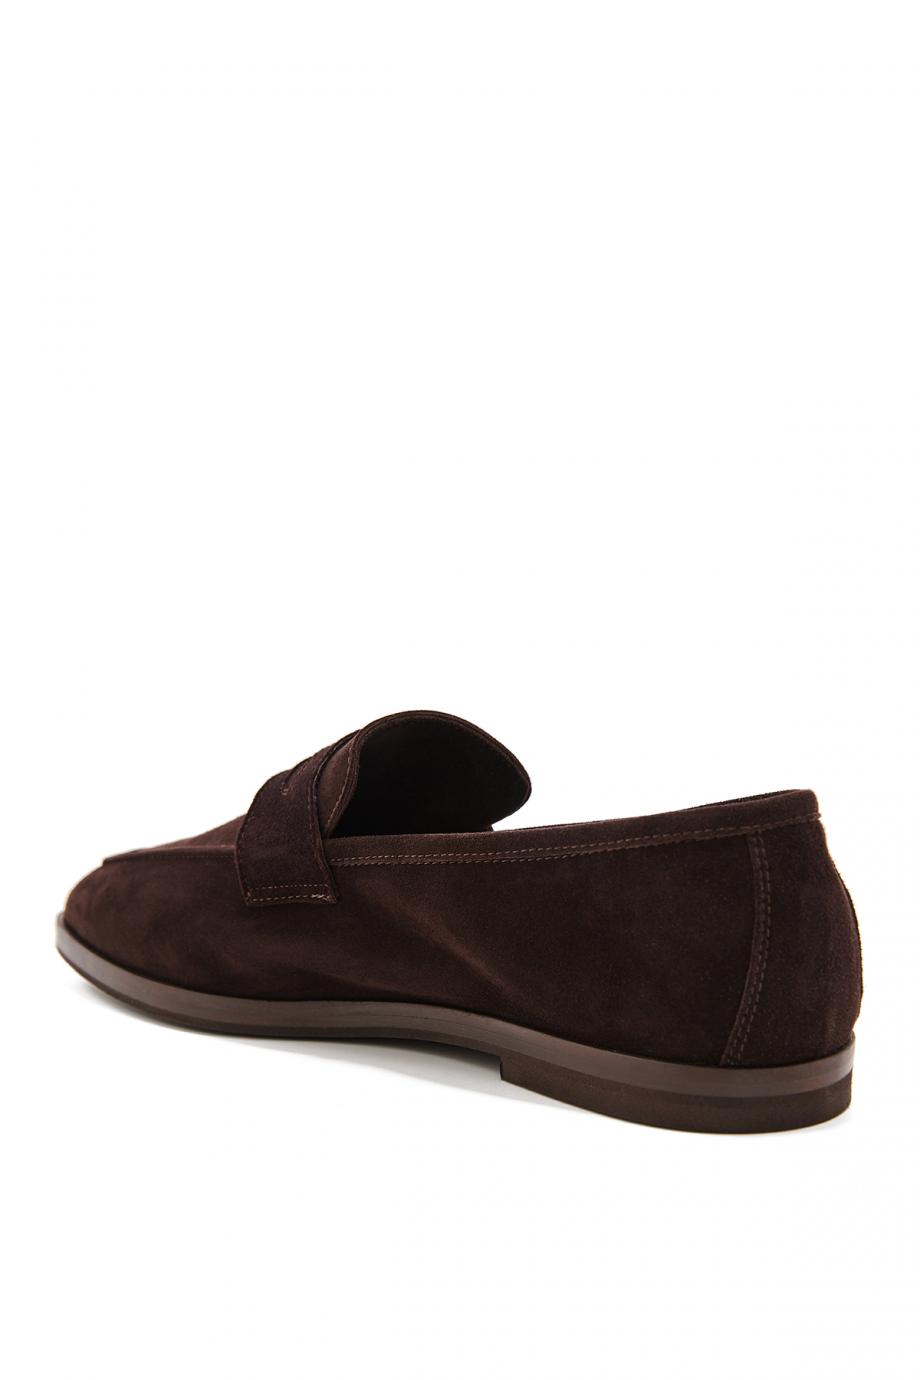 Chalet Donna suede loafers